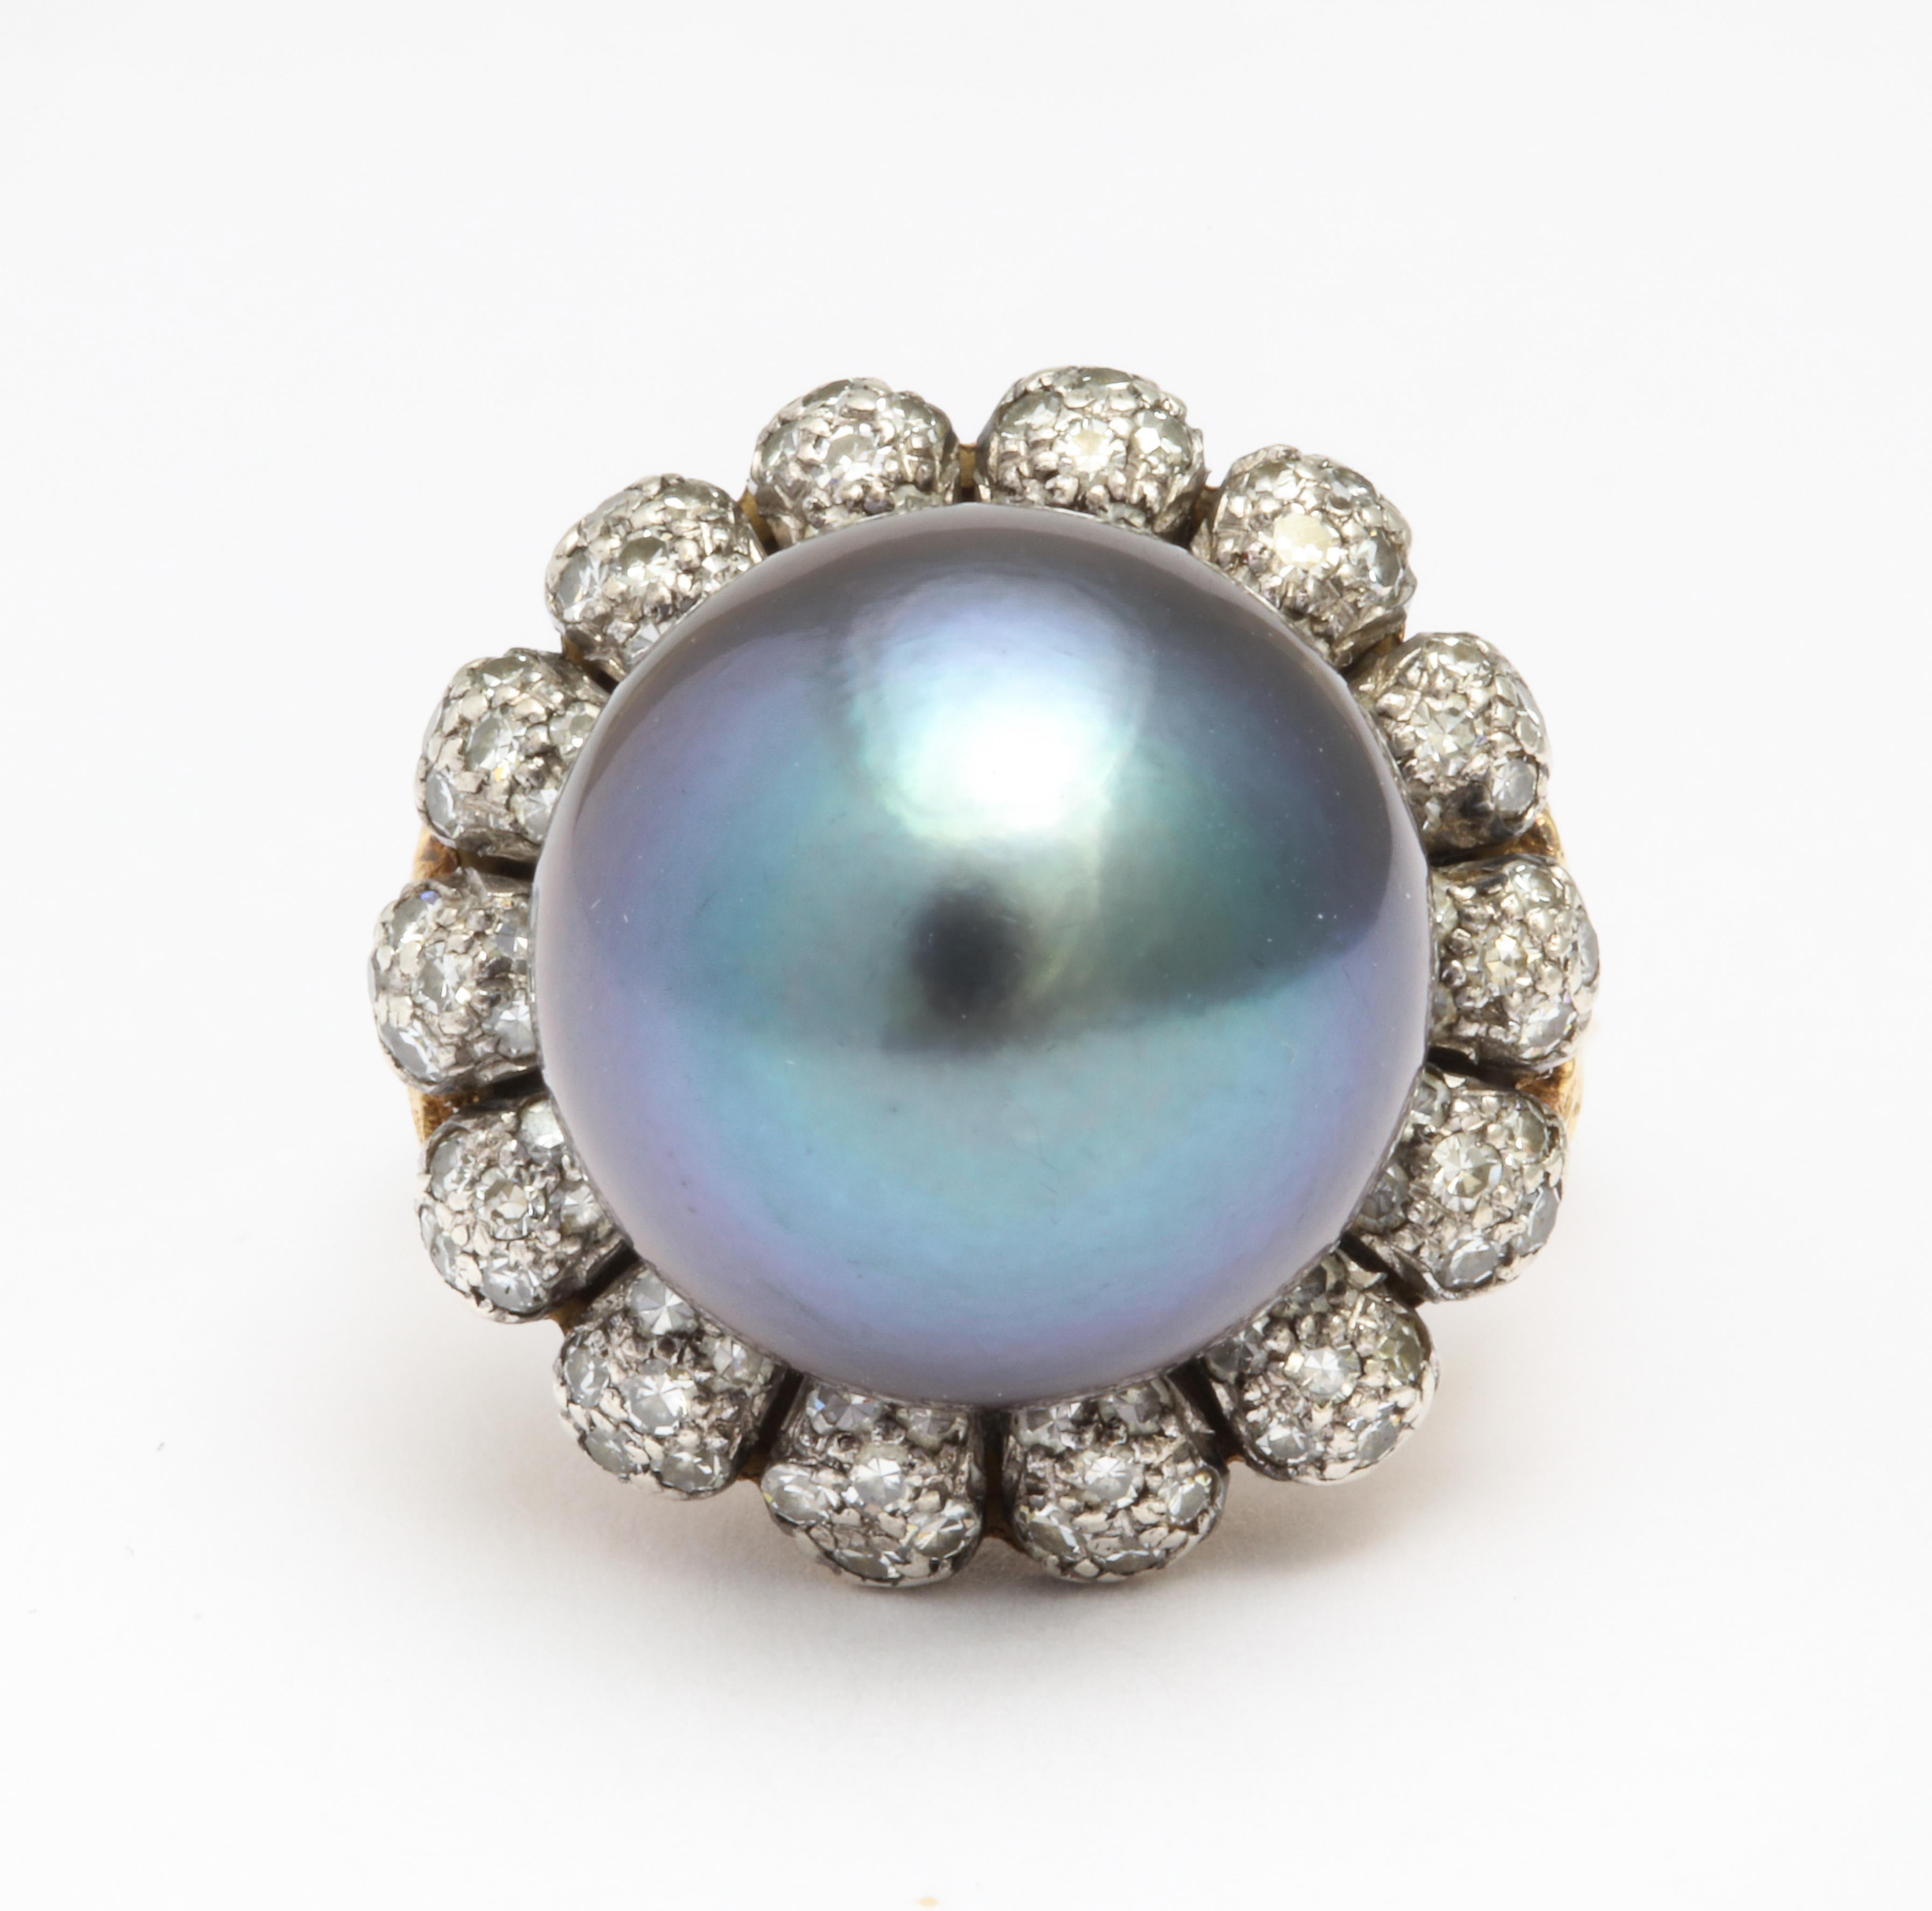 A beautiful 14mm Tahitian Pearl with aubergine tone and incredible luster is the center of this 18K yellow gold ballerina ring.  It's surrounded by a row of 14 demure old mine cut diamonds, with an estimated total weight of 0.50 carats. 
Size 6